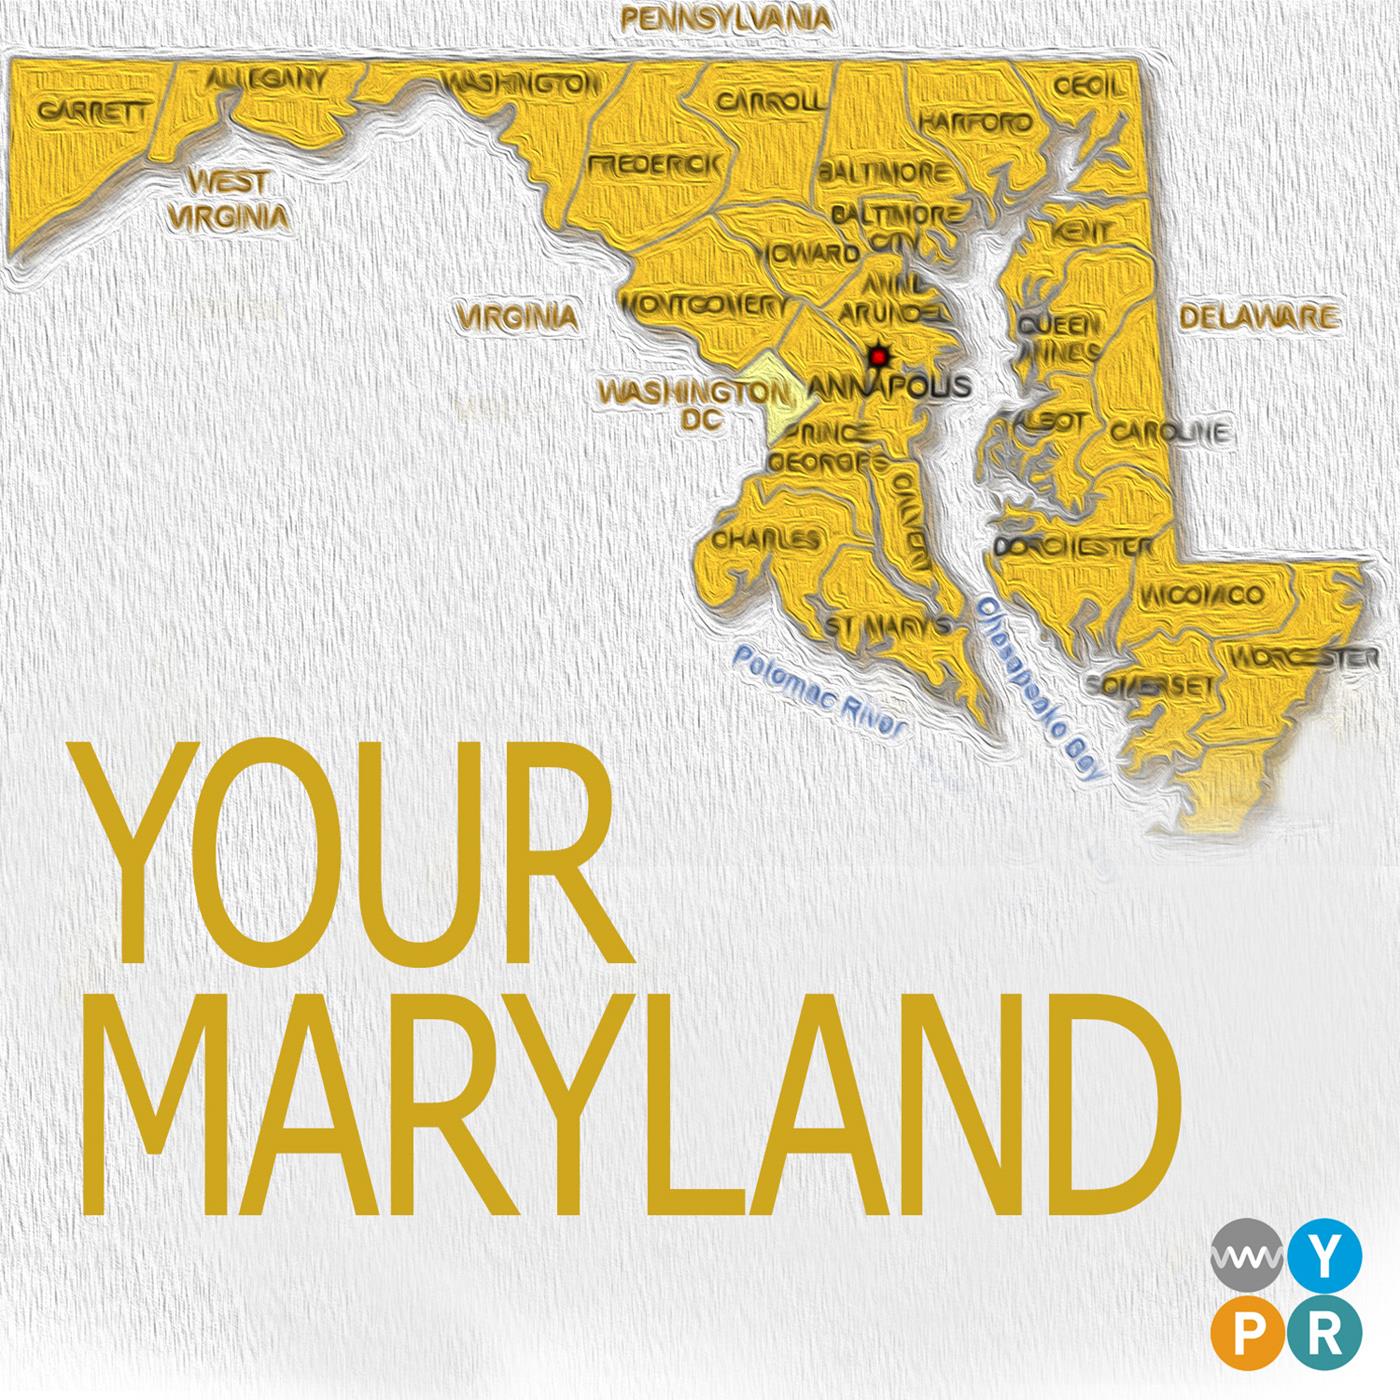 "Maryland, The Free State"